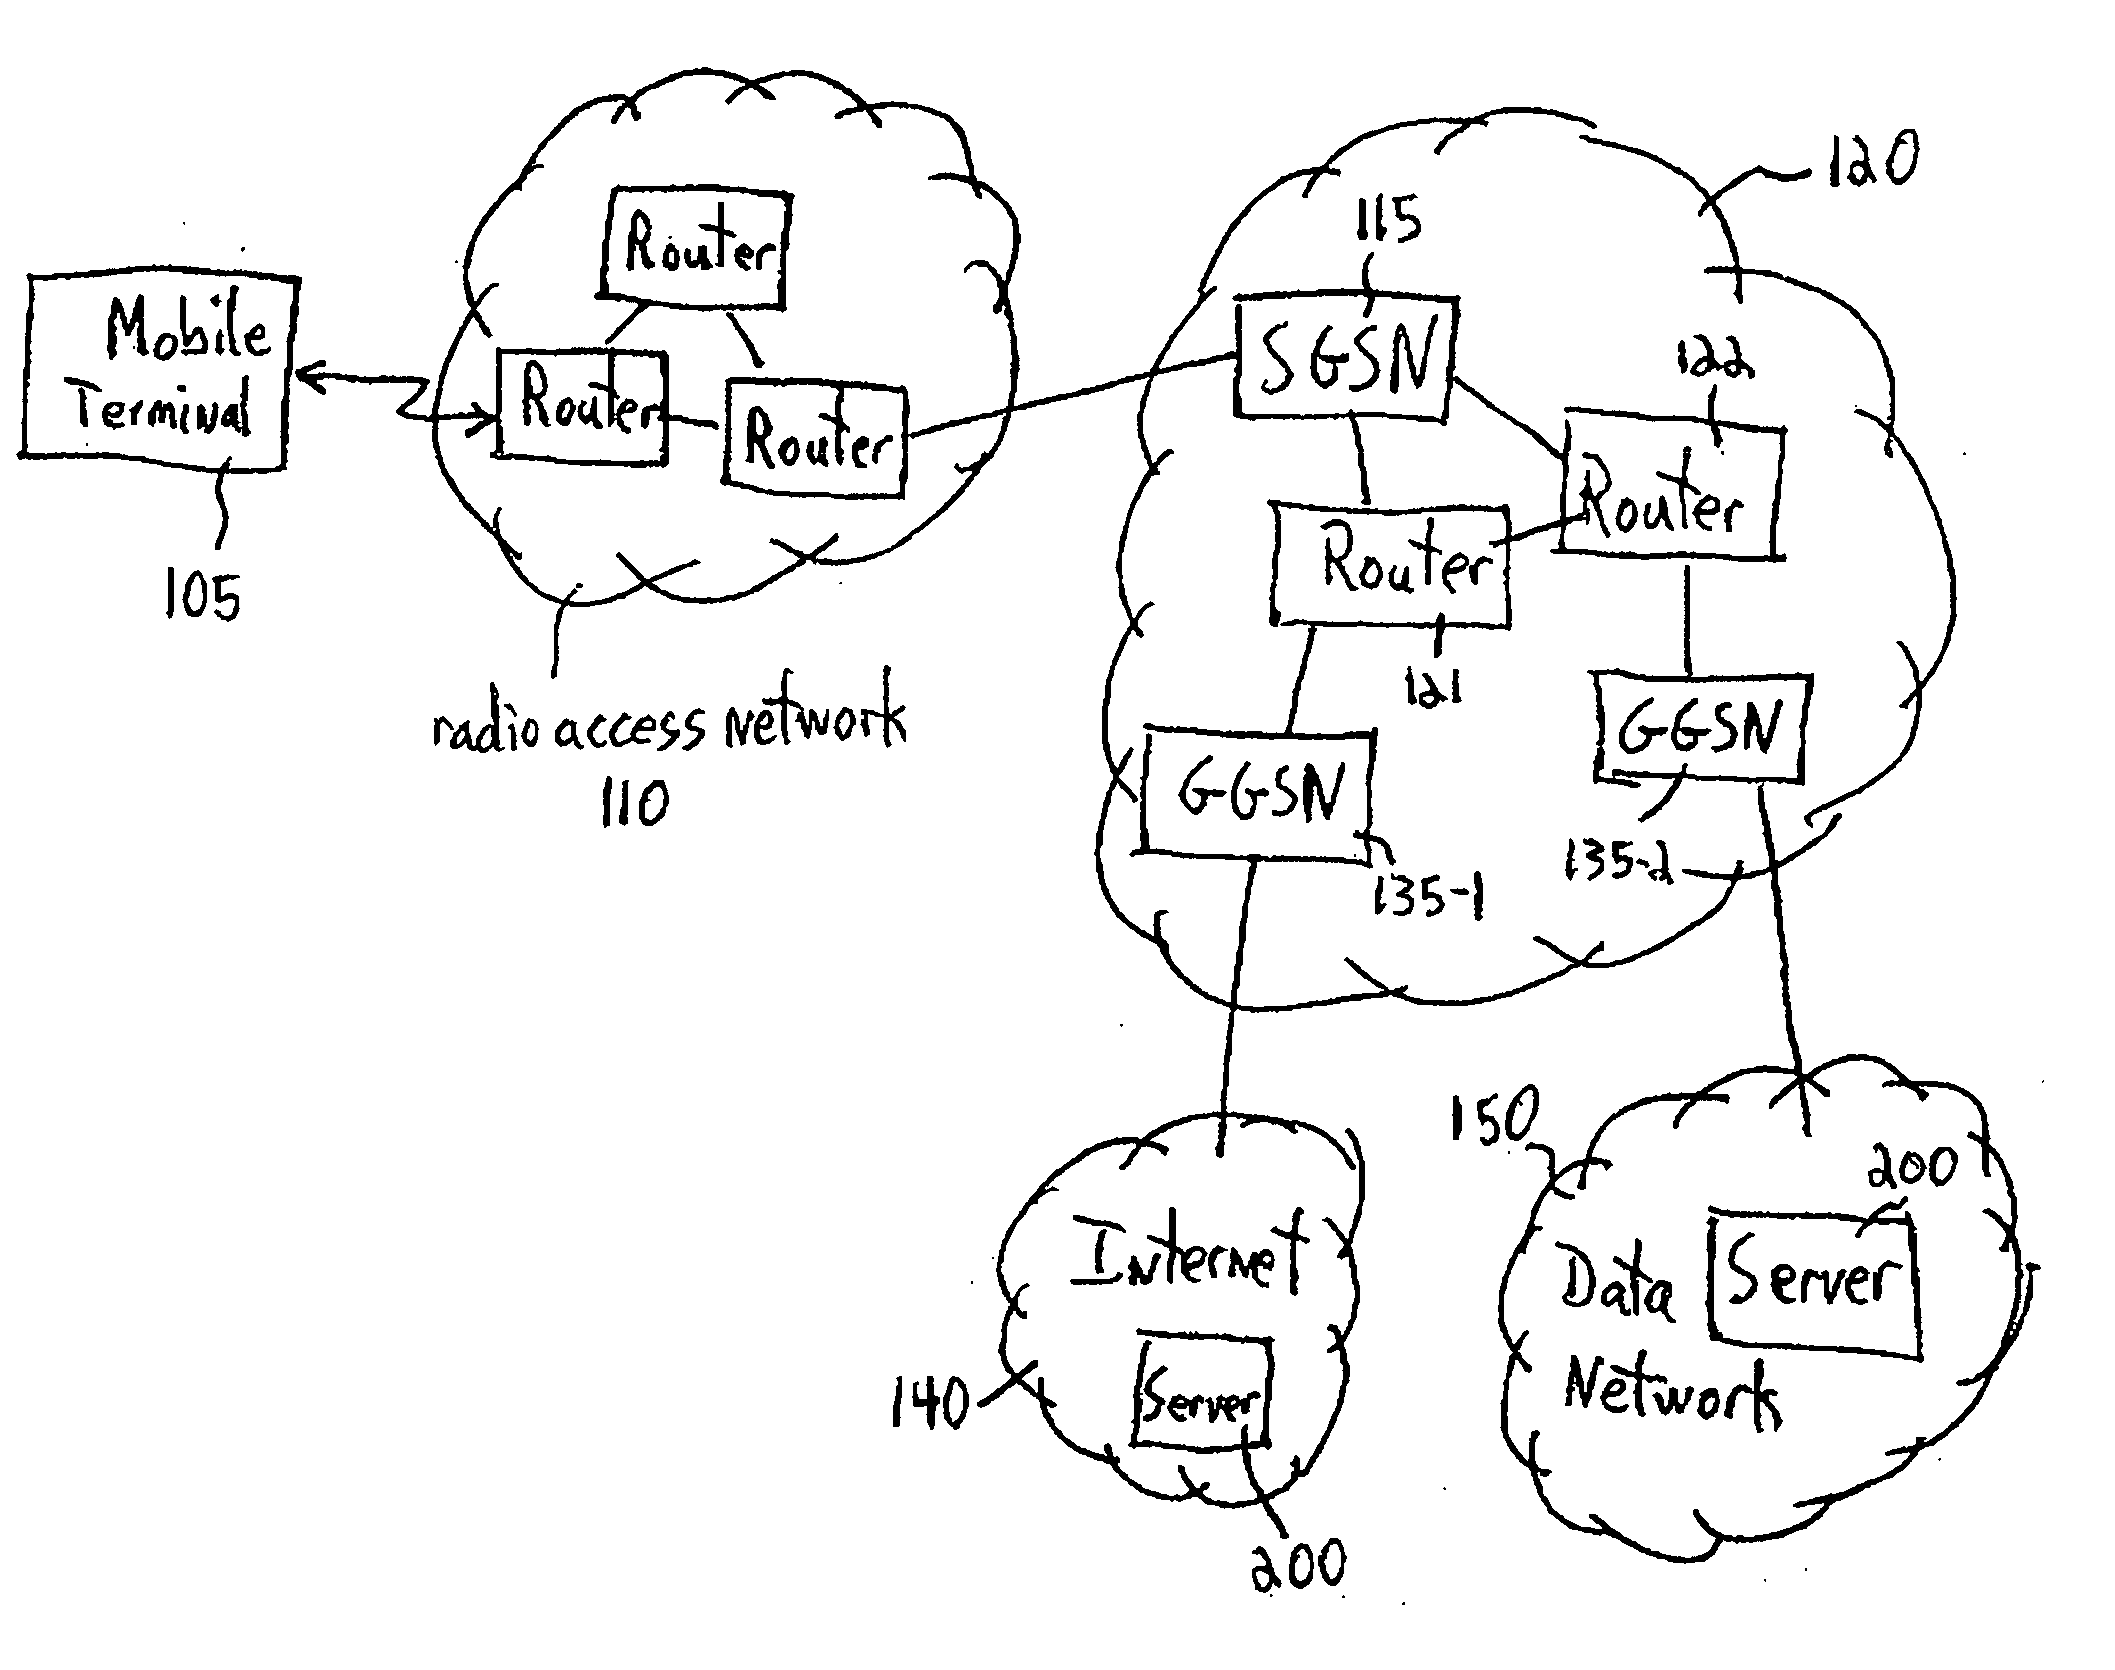 Optimization of a TCP connection